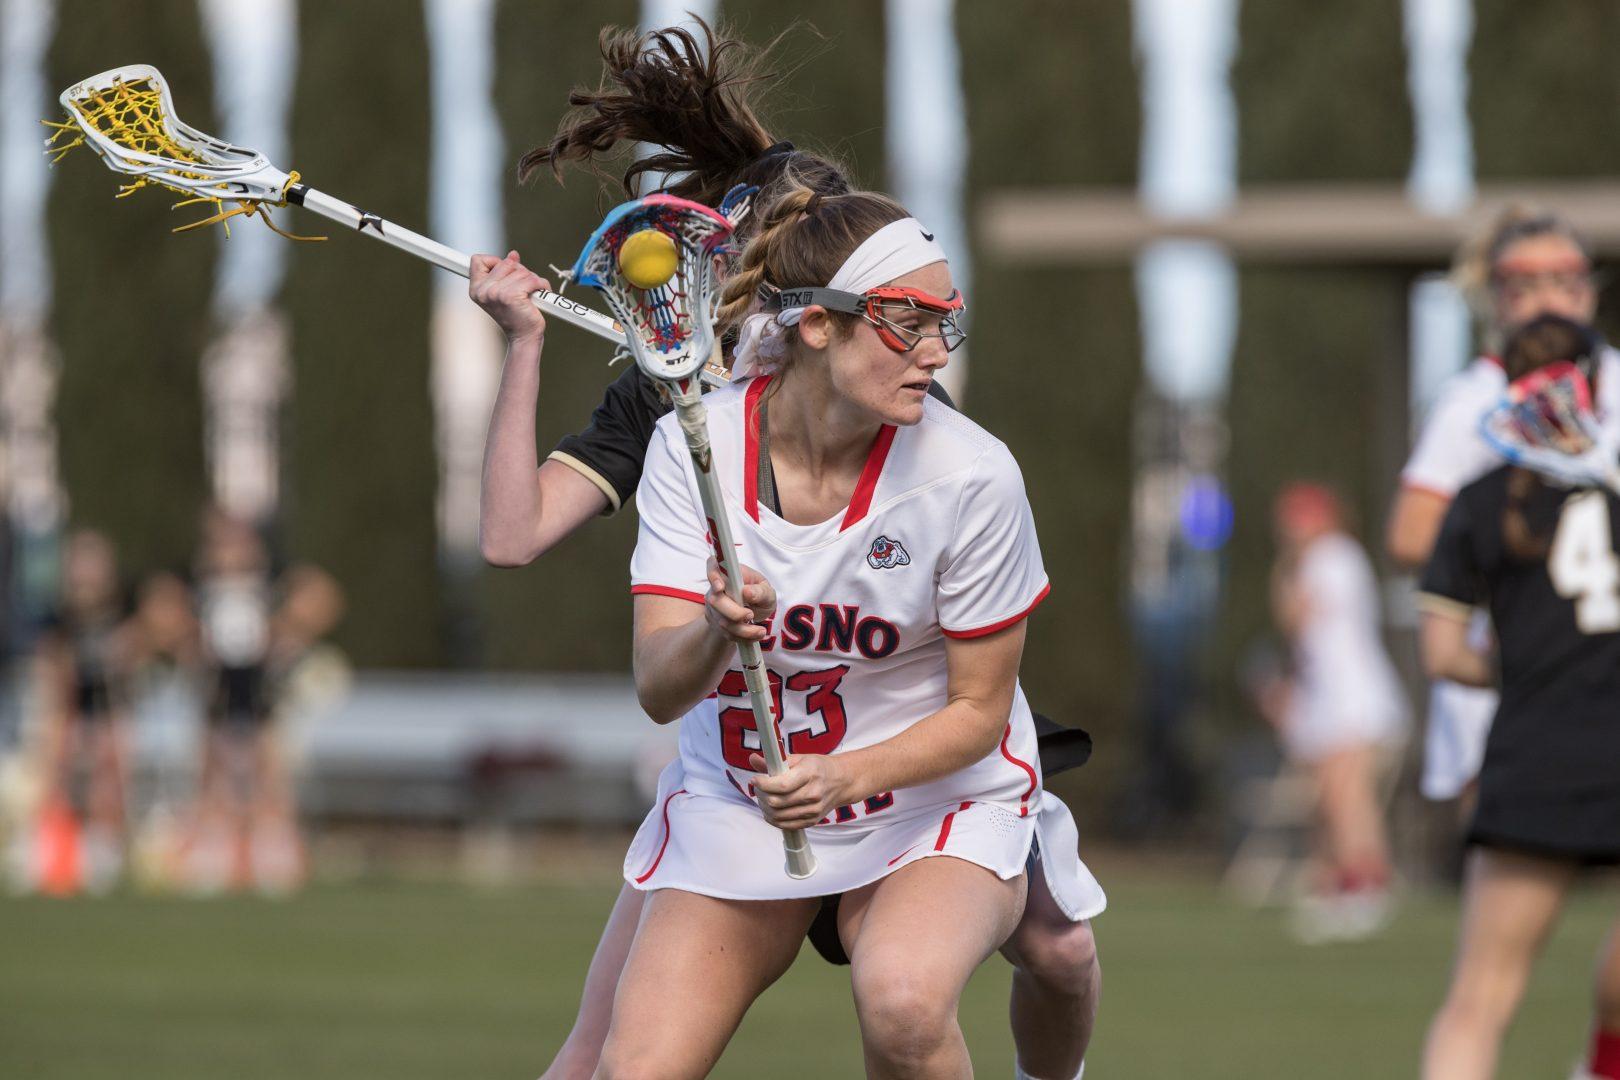 Junior Sarah Bloise leads the Fresno State lacrosse team with 39 goals and 20 assists. The team heads to UC Davis for its last regular season game on April 21, 2018. (Fresno State Athletics) 